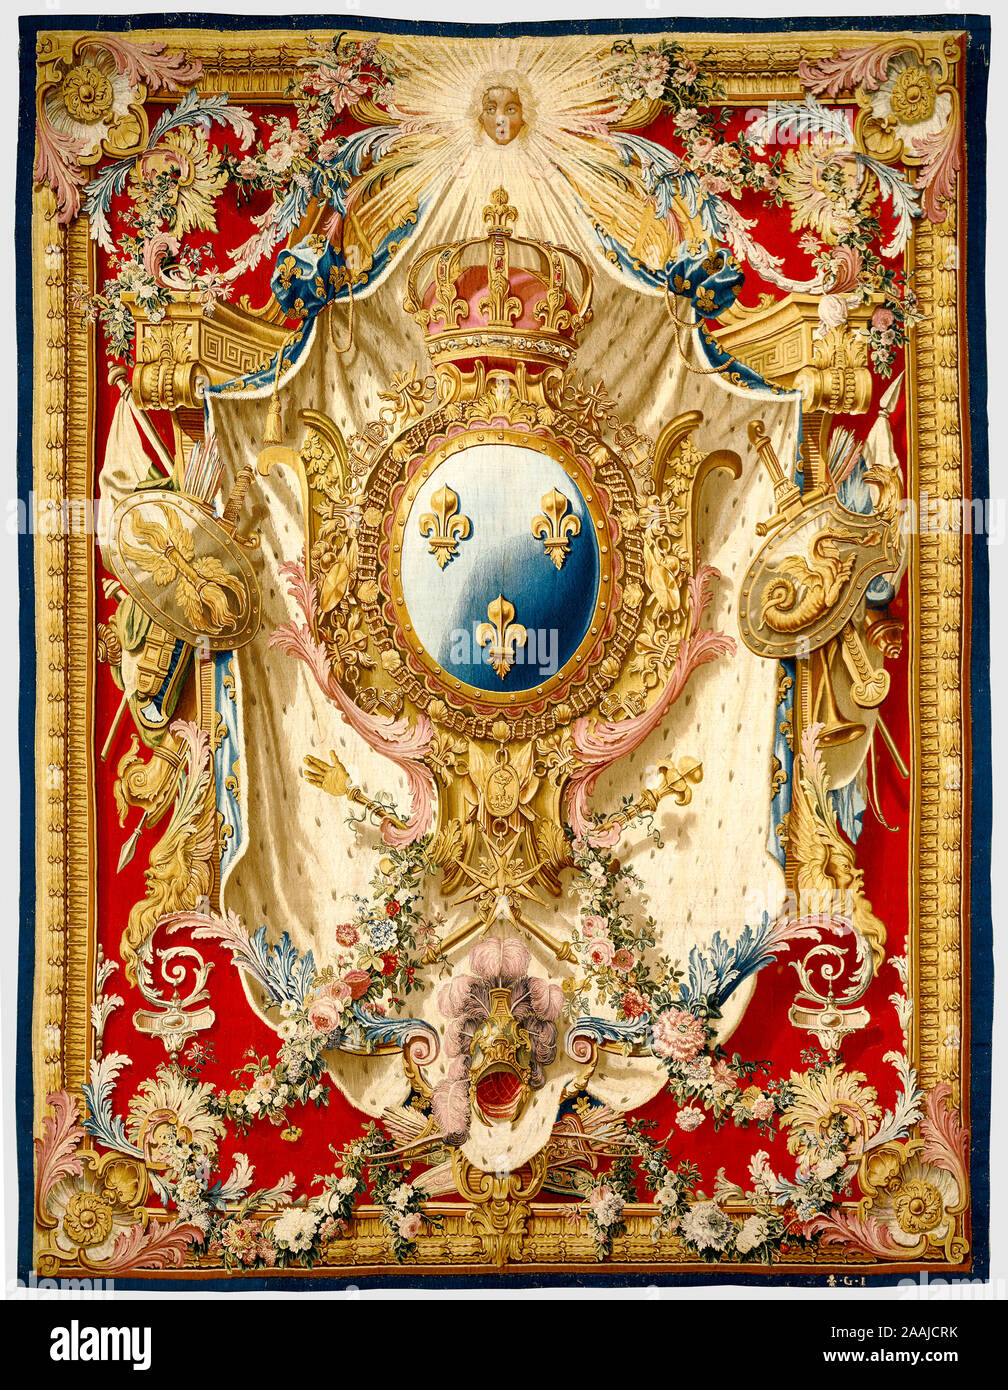 Tapestry: Portière aux Armes de France; woven under the direction of Etienne-Claude Le Blond (French, about 1700 - 1751), Pierre-Josse Perrot (French, active 1724 - 1750), Royal Factory of Furniture to the Crown at the Gobelins Manufactory (French, founded 1662 - present); Gobelins, France; designed 1727, woven about 1730 - 1740; Wool and silk; modern cotton lining; 360.7 x 266.7 cm (142 x 105 in.) Stock Photo